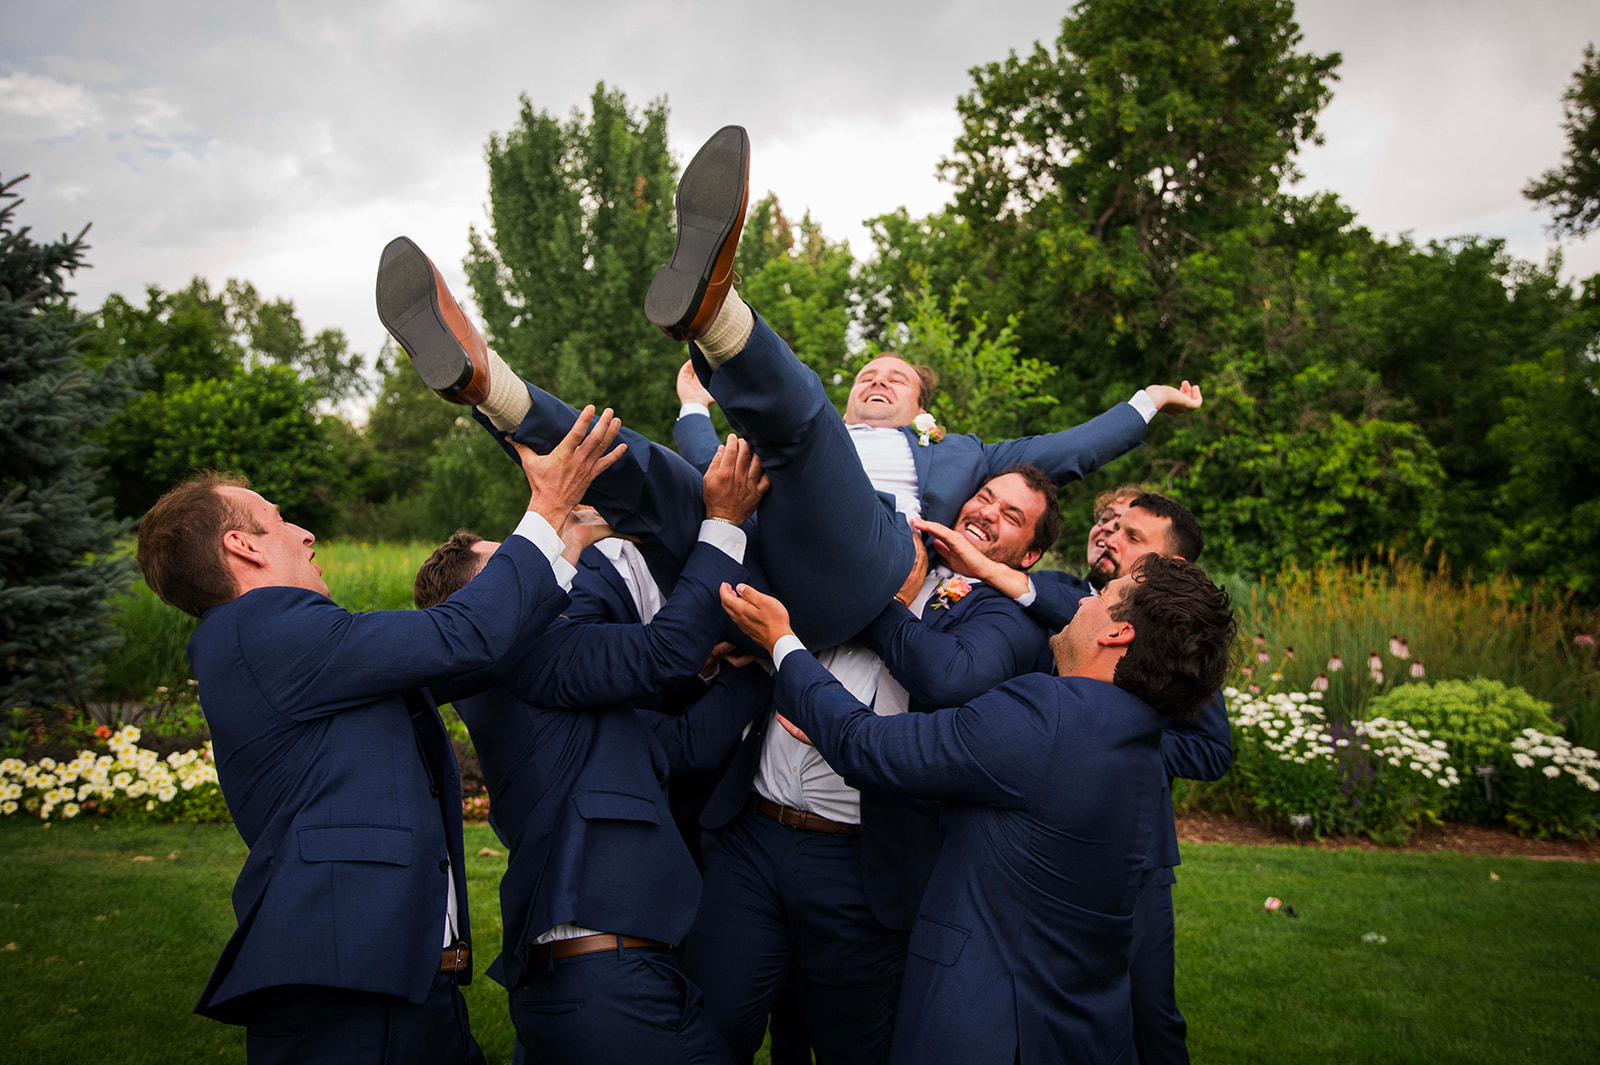 Groomsmen lift groom in the air as they all laugh.